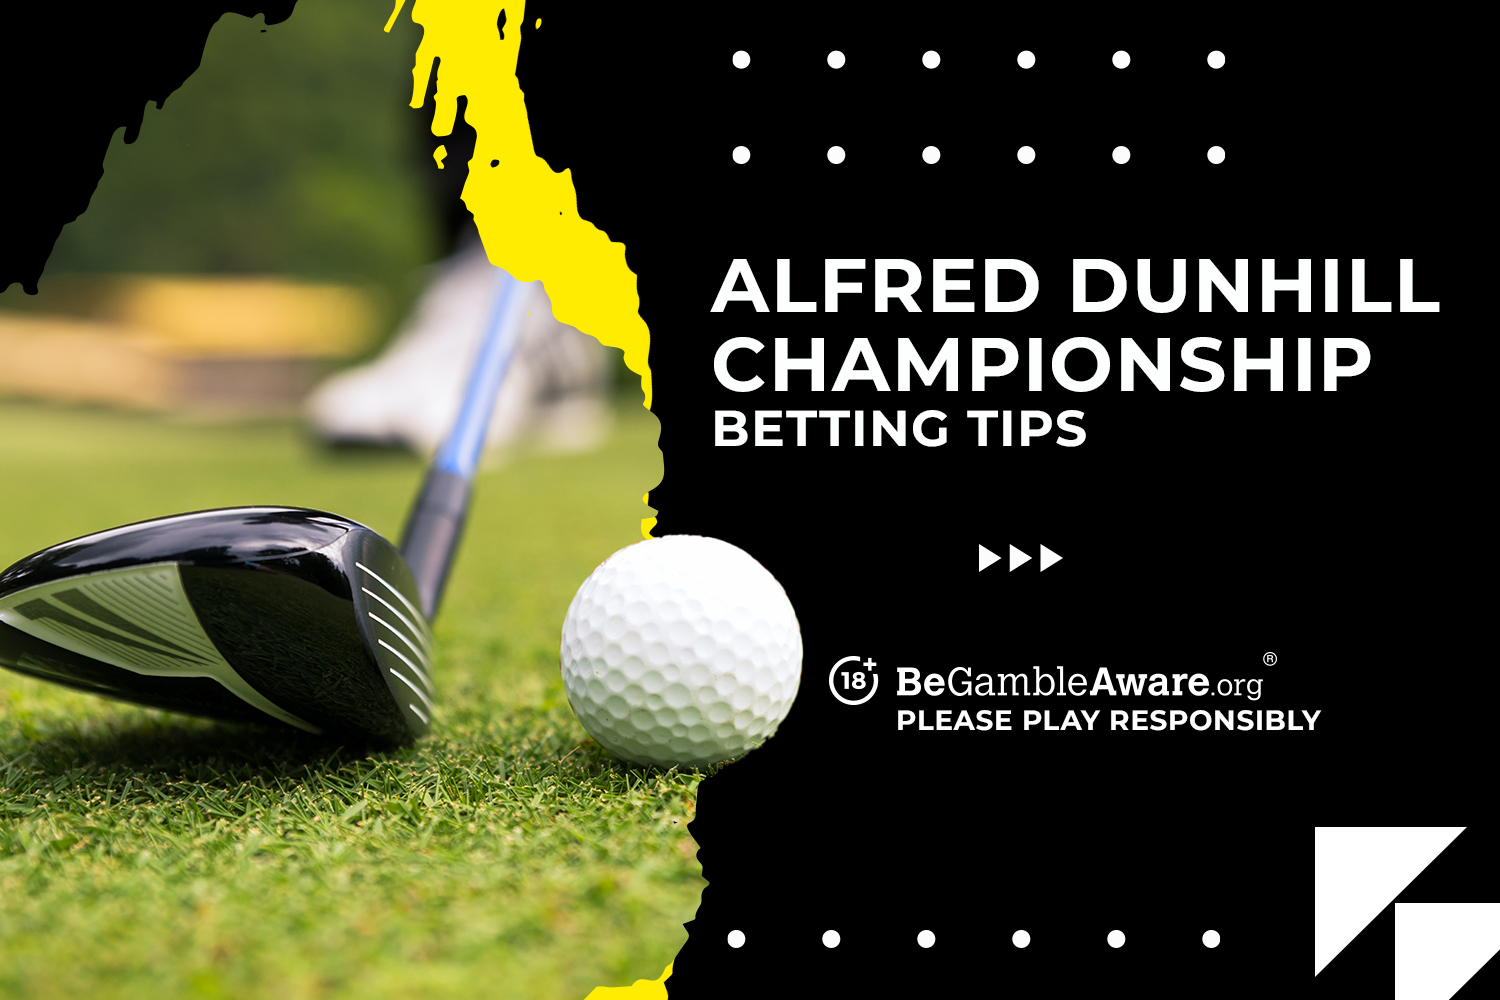 Photo: alfred dunhill golf betting tips